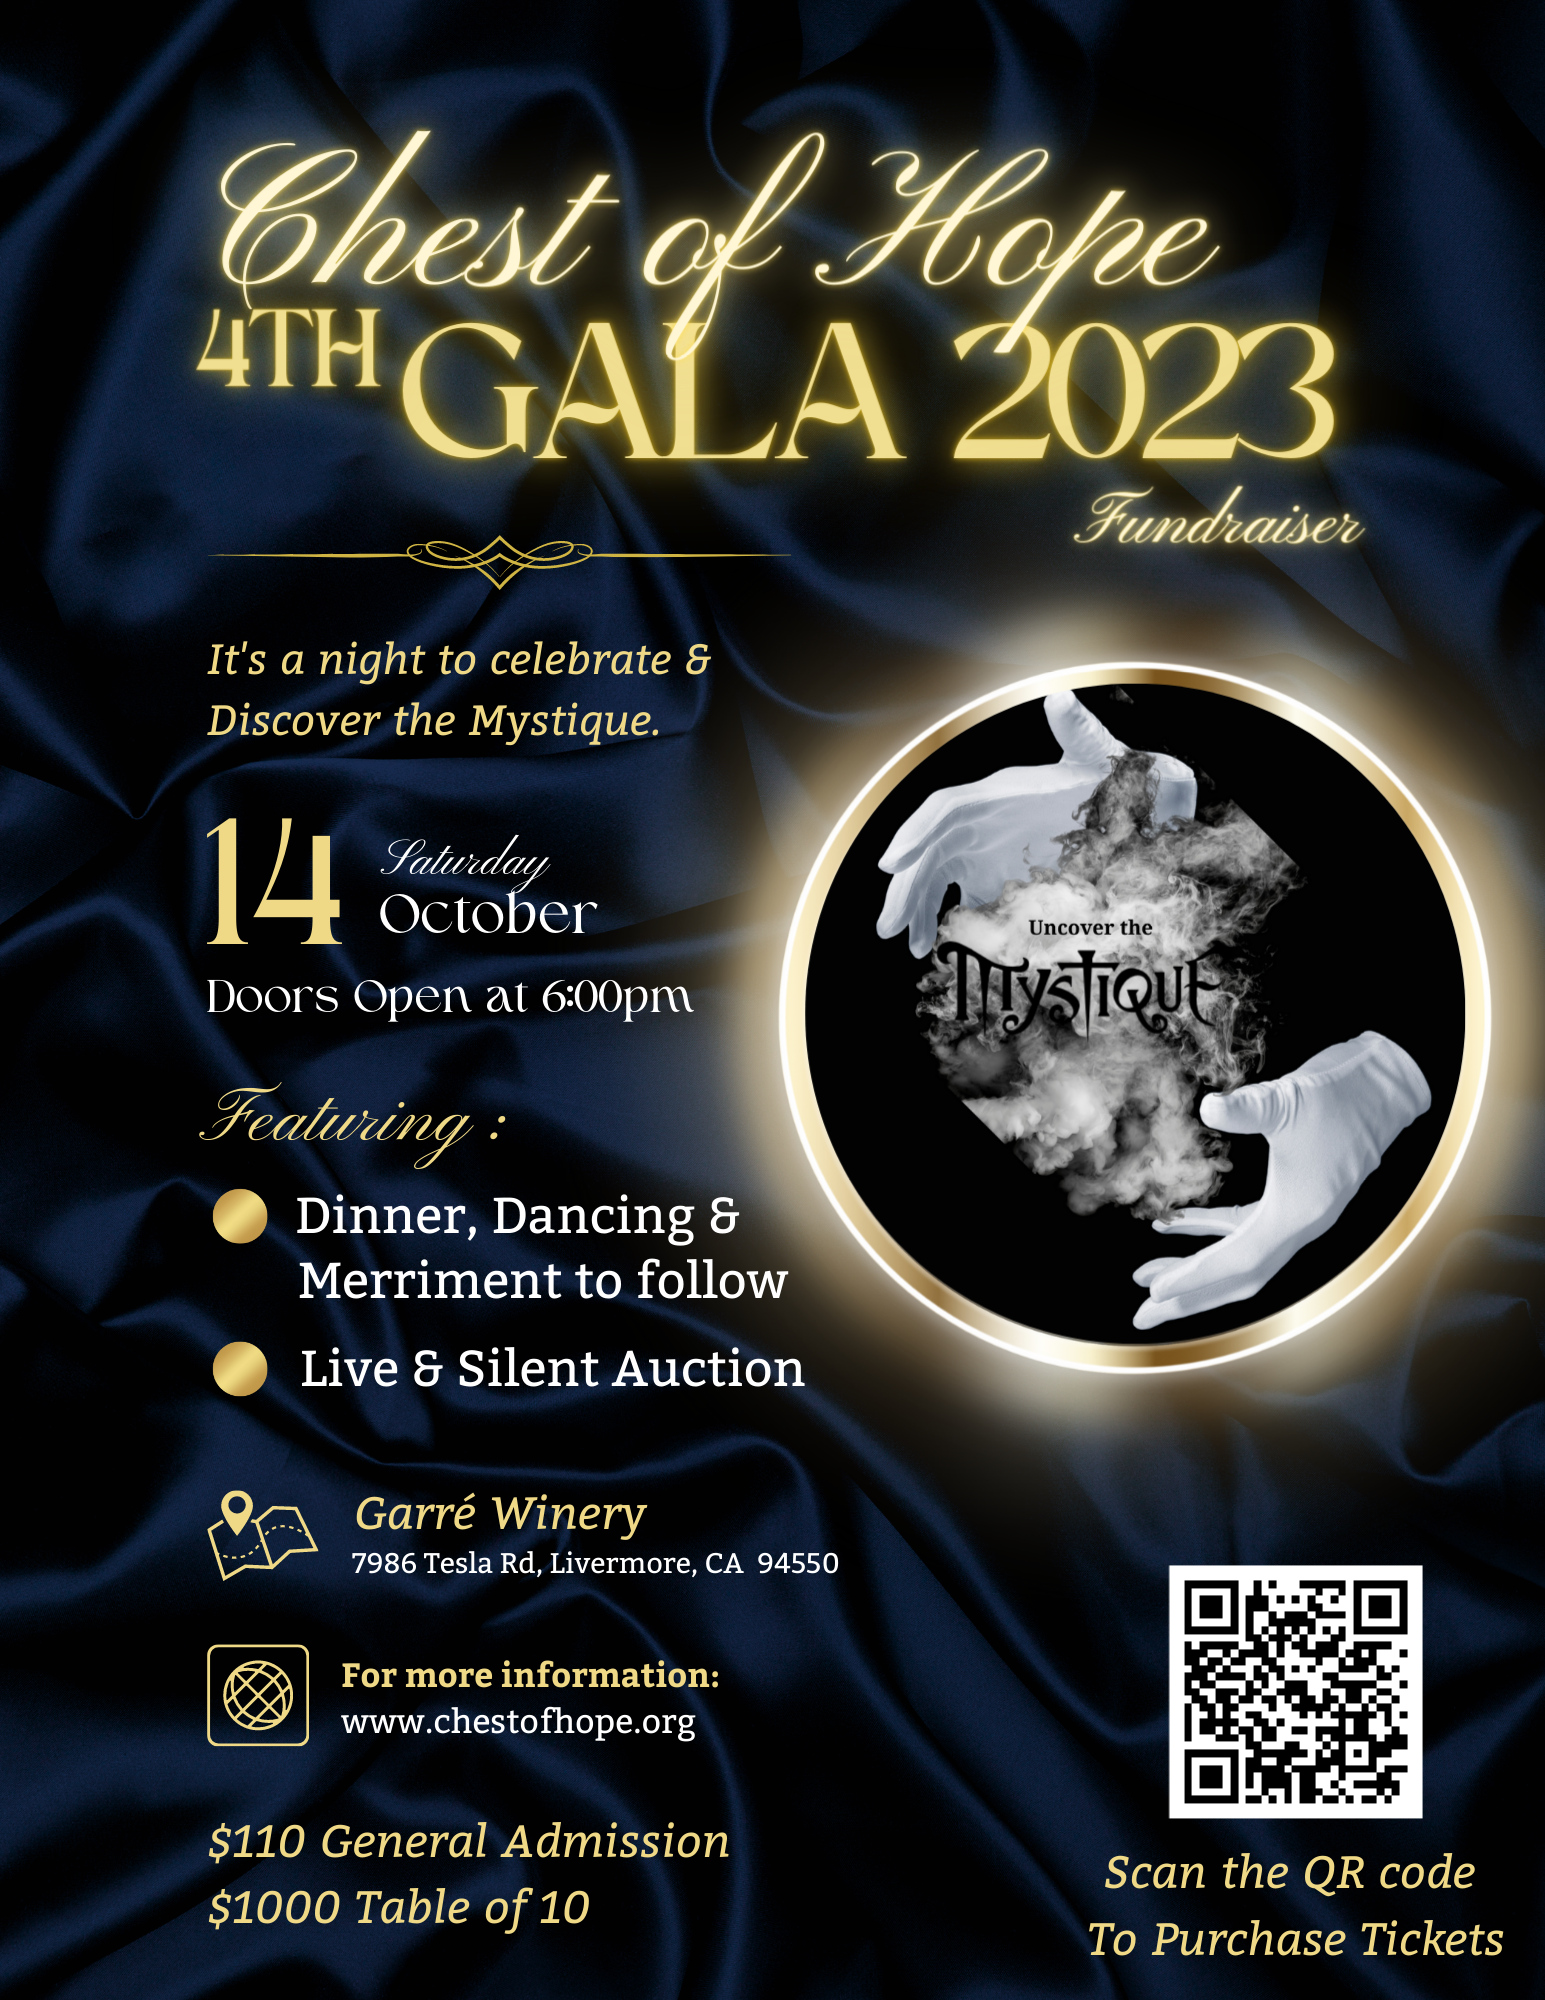 Chest of Hope 4th Gala 2023. It's a night to celebrate & Discover the Mystique. Saturday evening, October 14, Livermore, California. Featuring Dinner, Dancing, and. a live and silent auction. $110 General Admission $1,000 Table of 10.